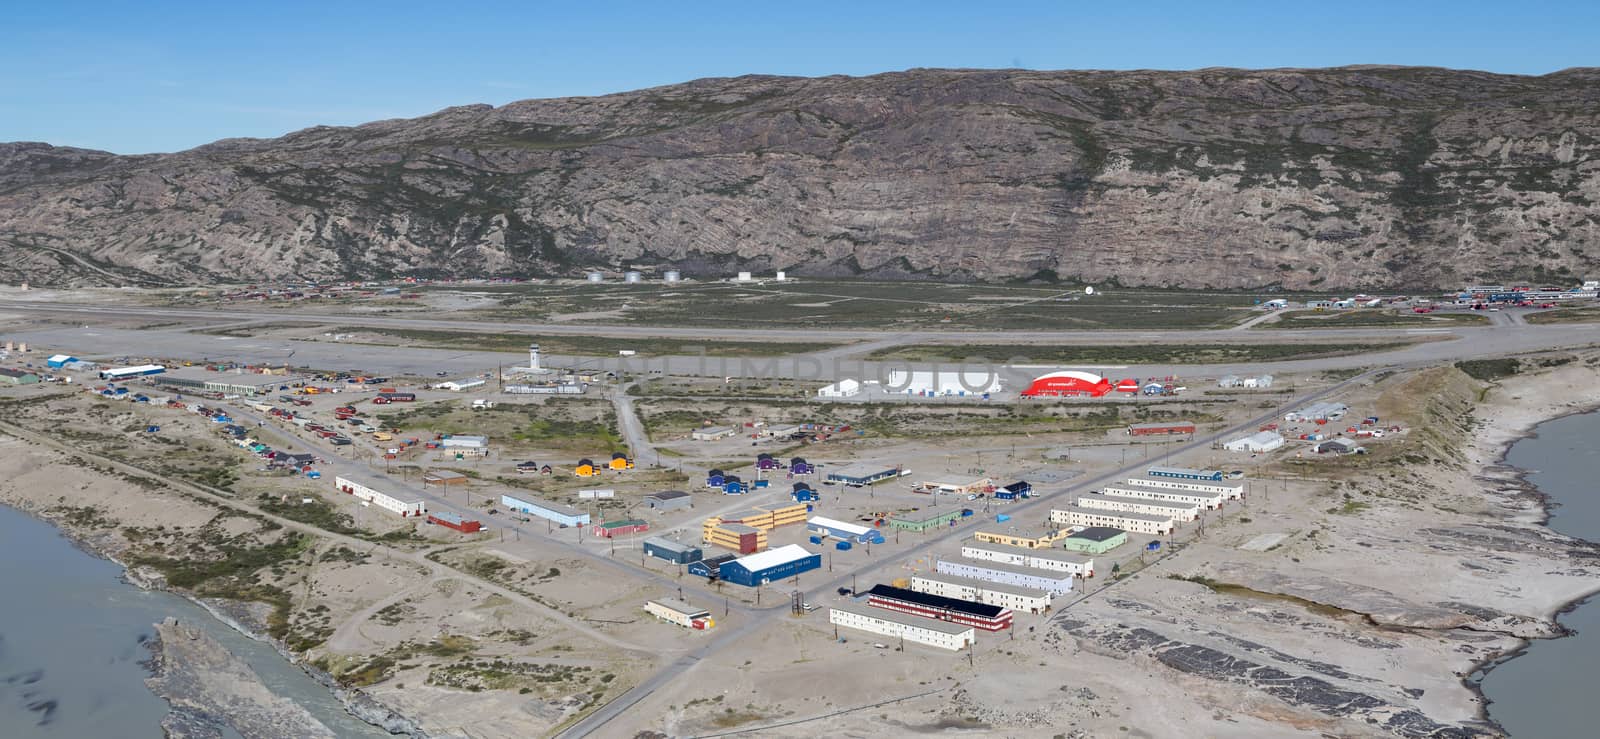 Kangerlussuaq, Greenland - July 13, 2018: Panoramic view of the village with the international airport, which is Greenland's main air transport hub.